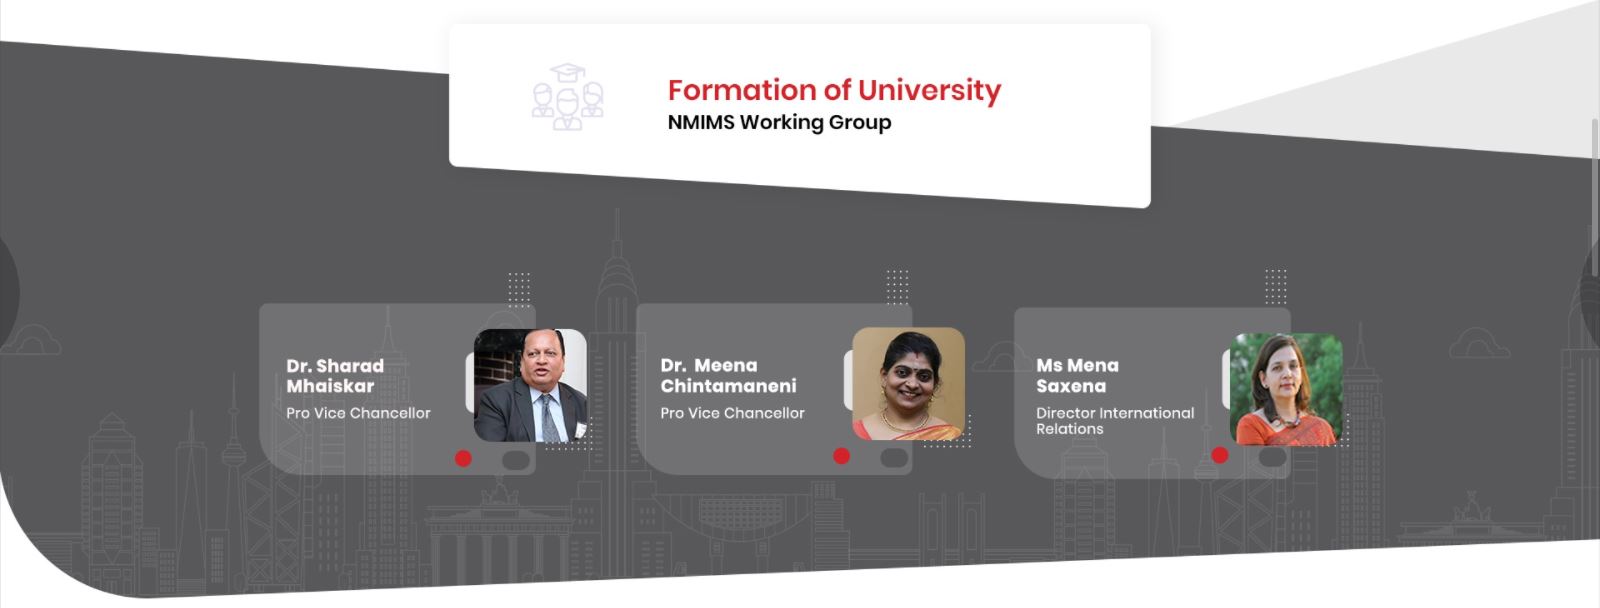 formation of university nmims working group